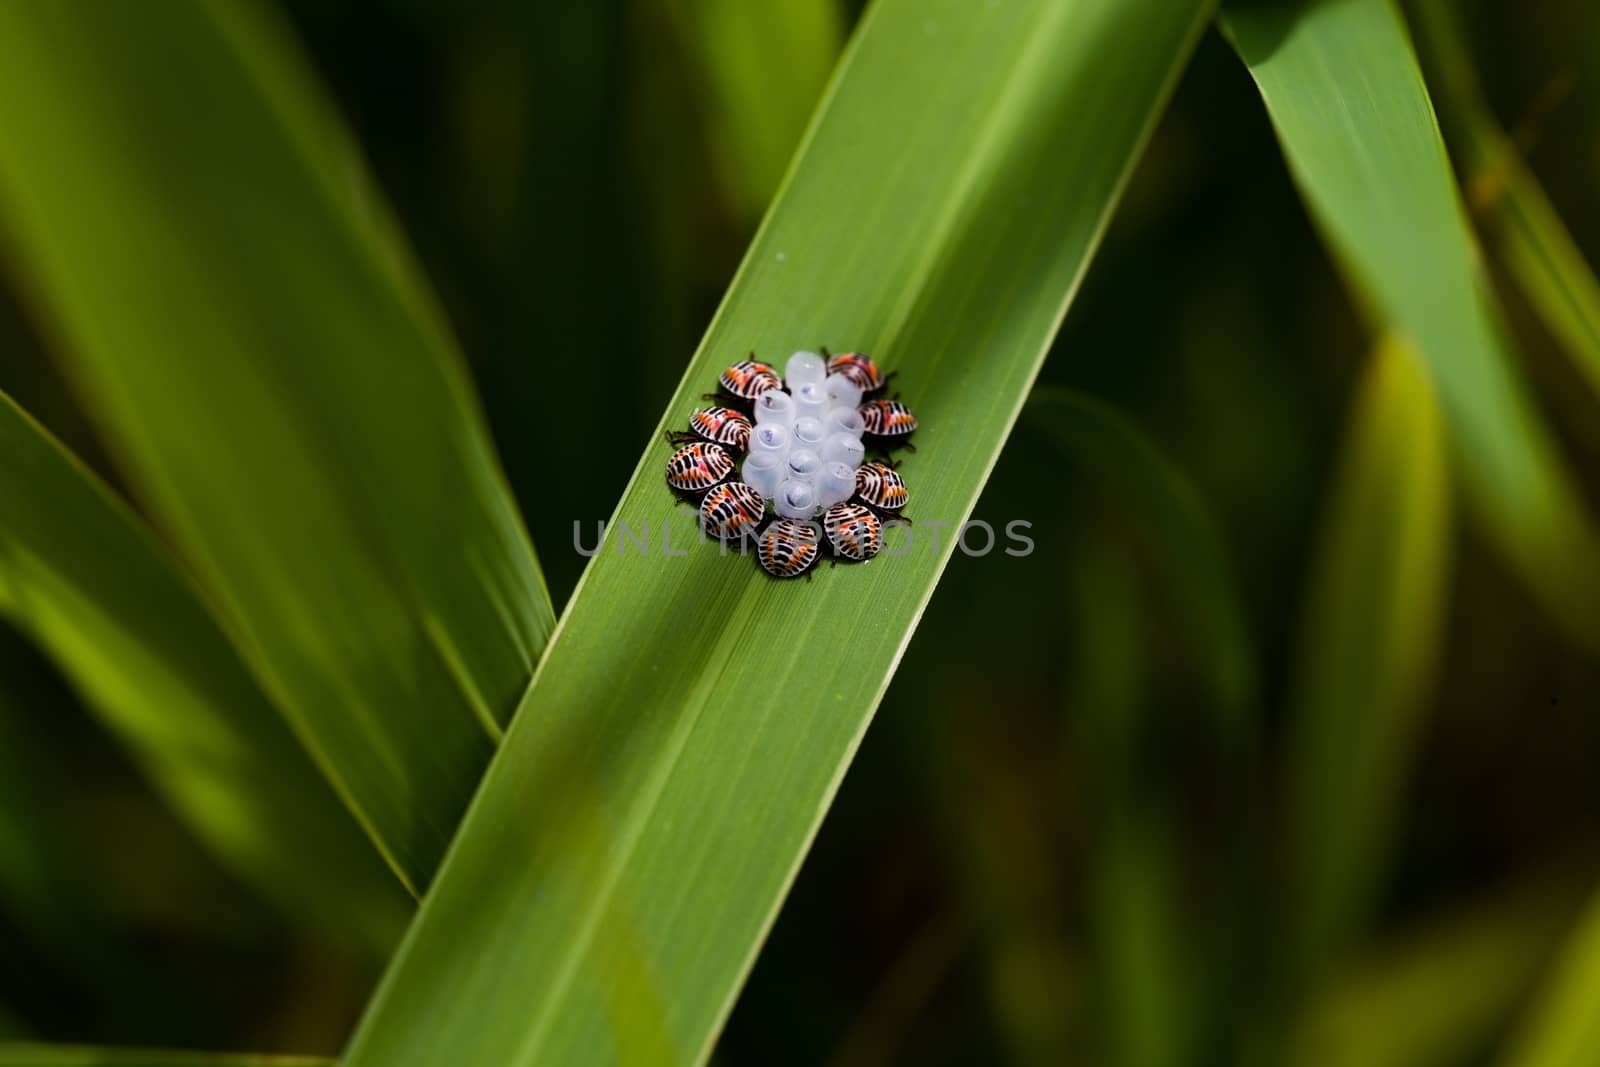 A group of harlequin bugs sitting around their eggs on a long, green leaf.